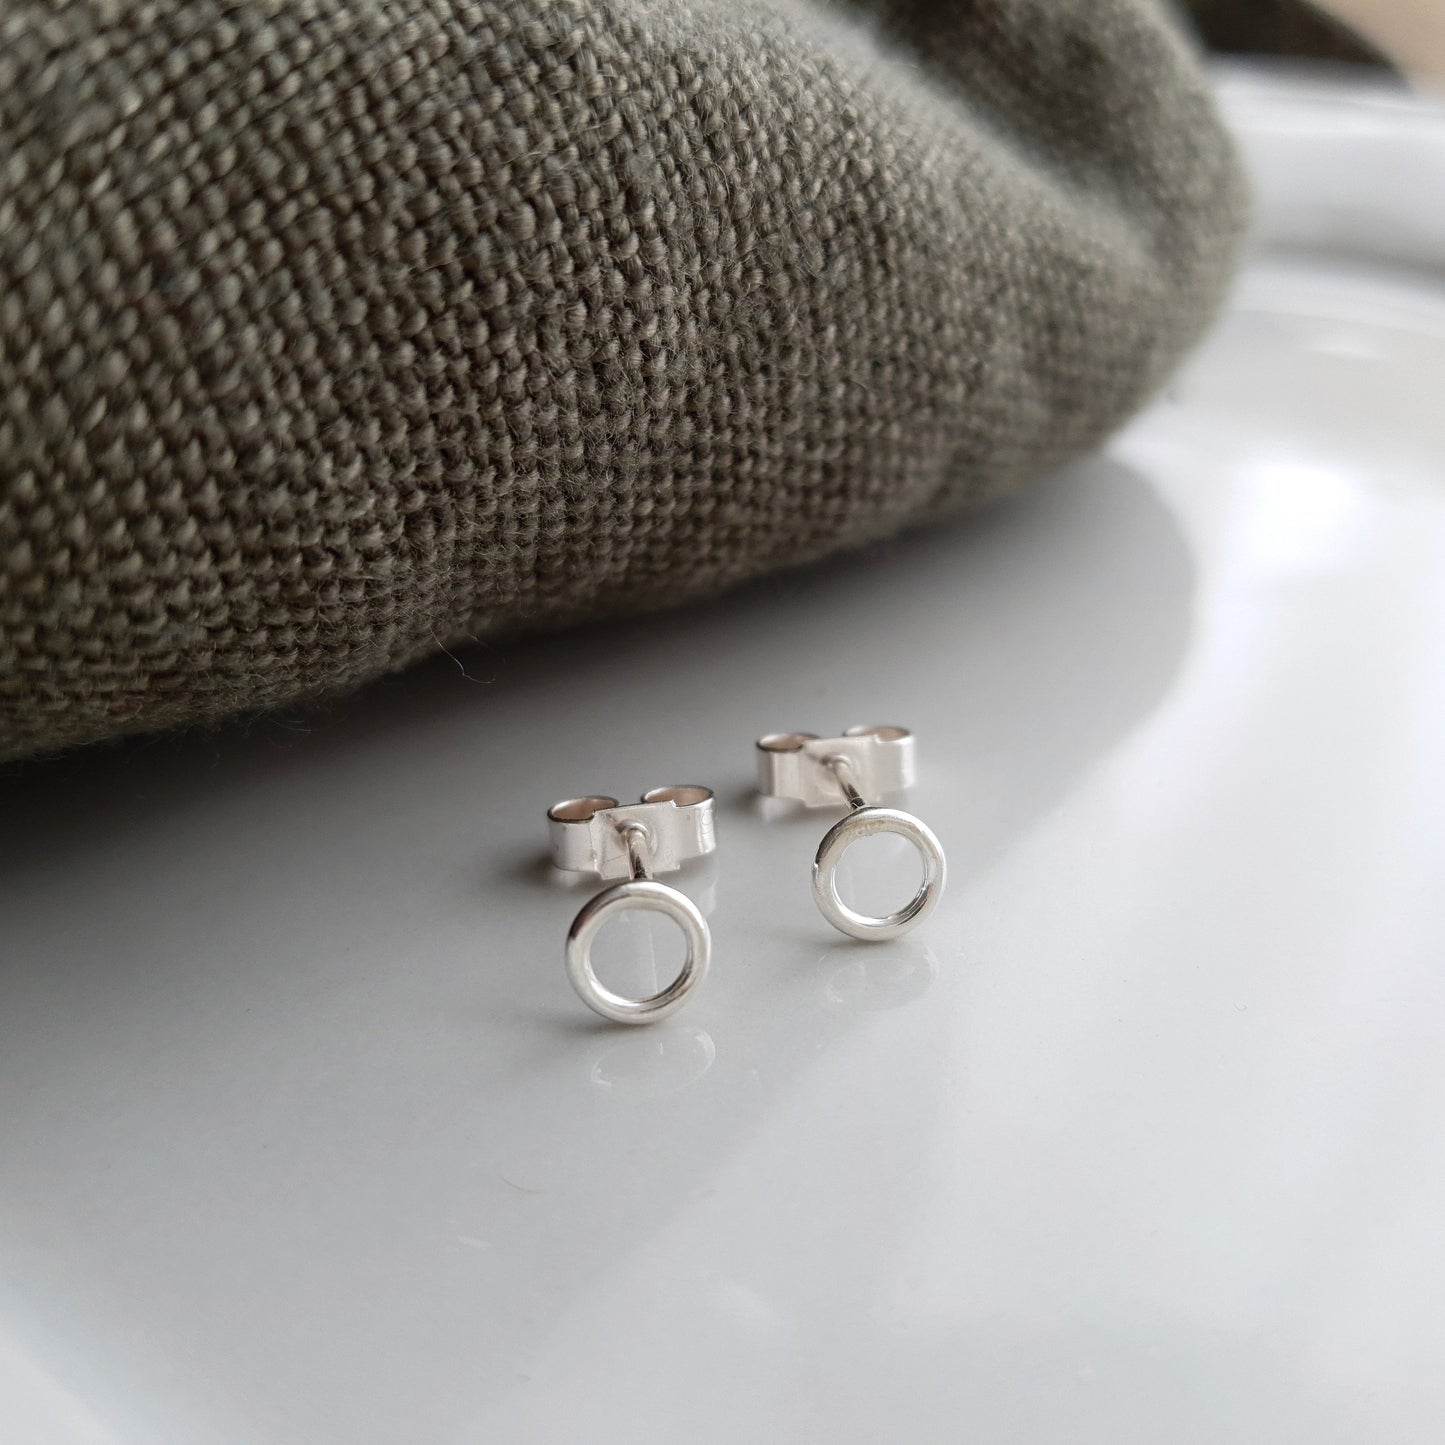 Small Silver Circle Studs Earrings handmade by Anna Calvert Jewellery in the UK